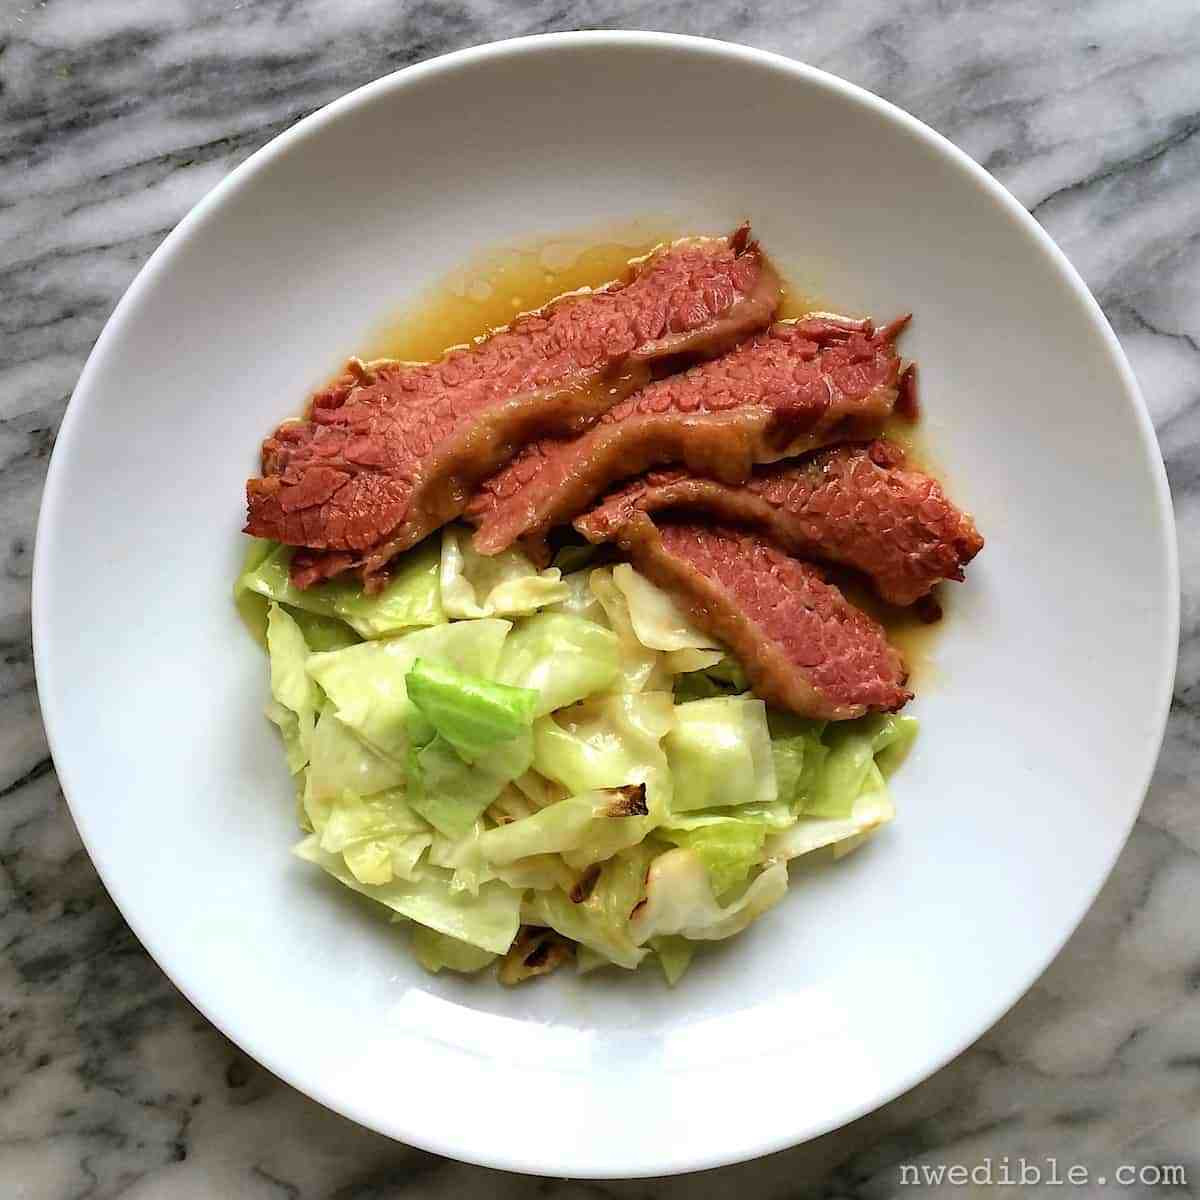 How To Make Corned Beef Brisket
 How To Make Corned Beef Brisket At Home